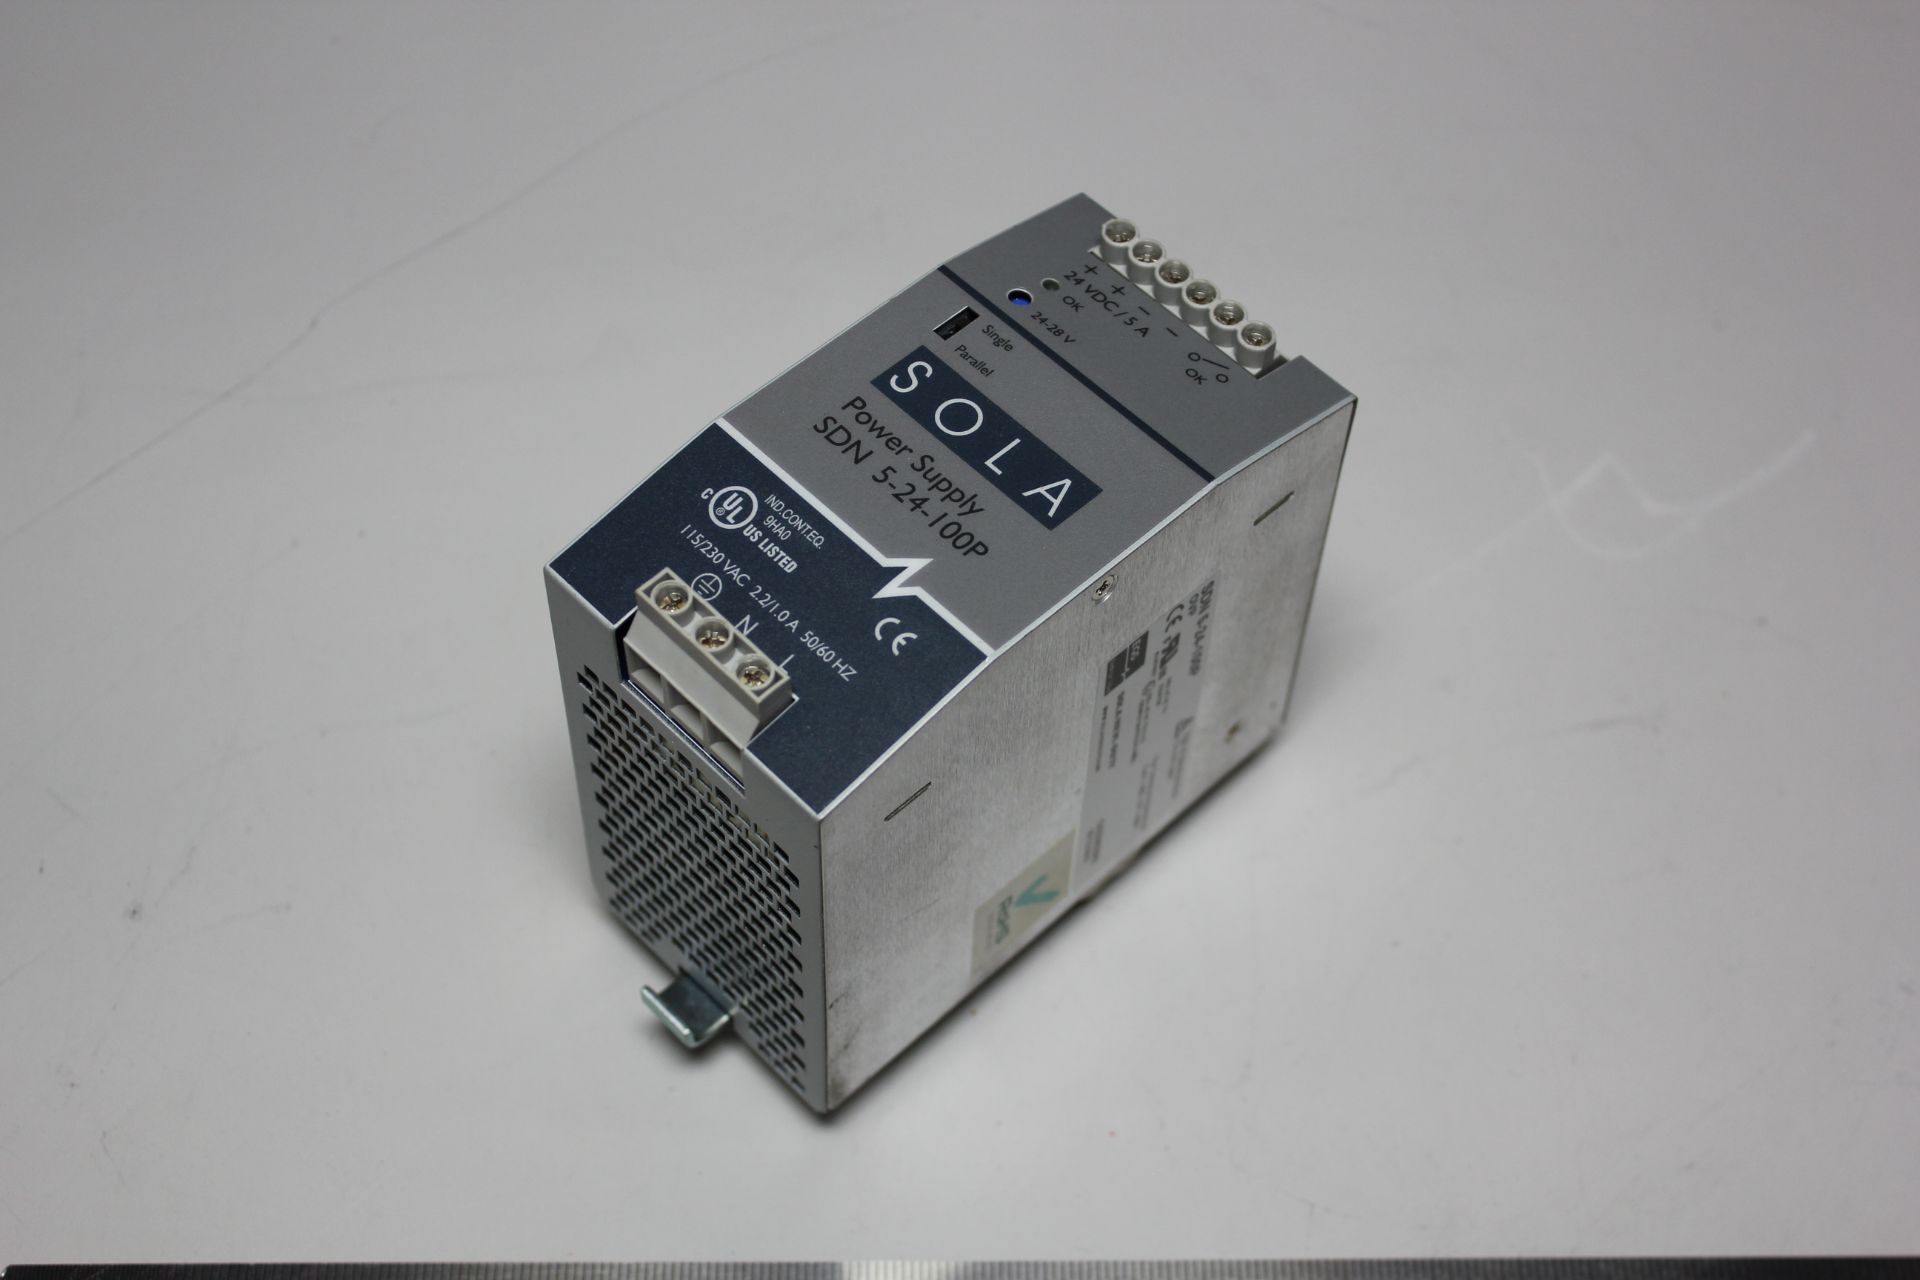 SOLA AUTOMATION POWER SUPPLY